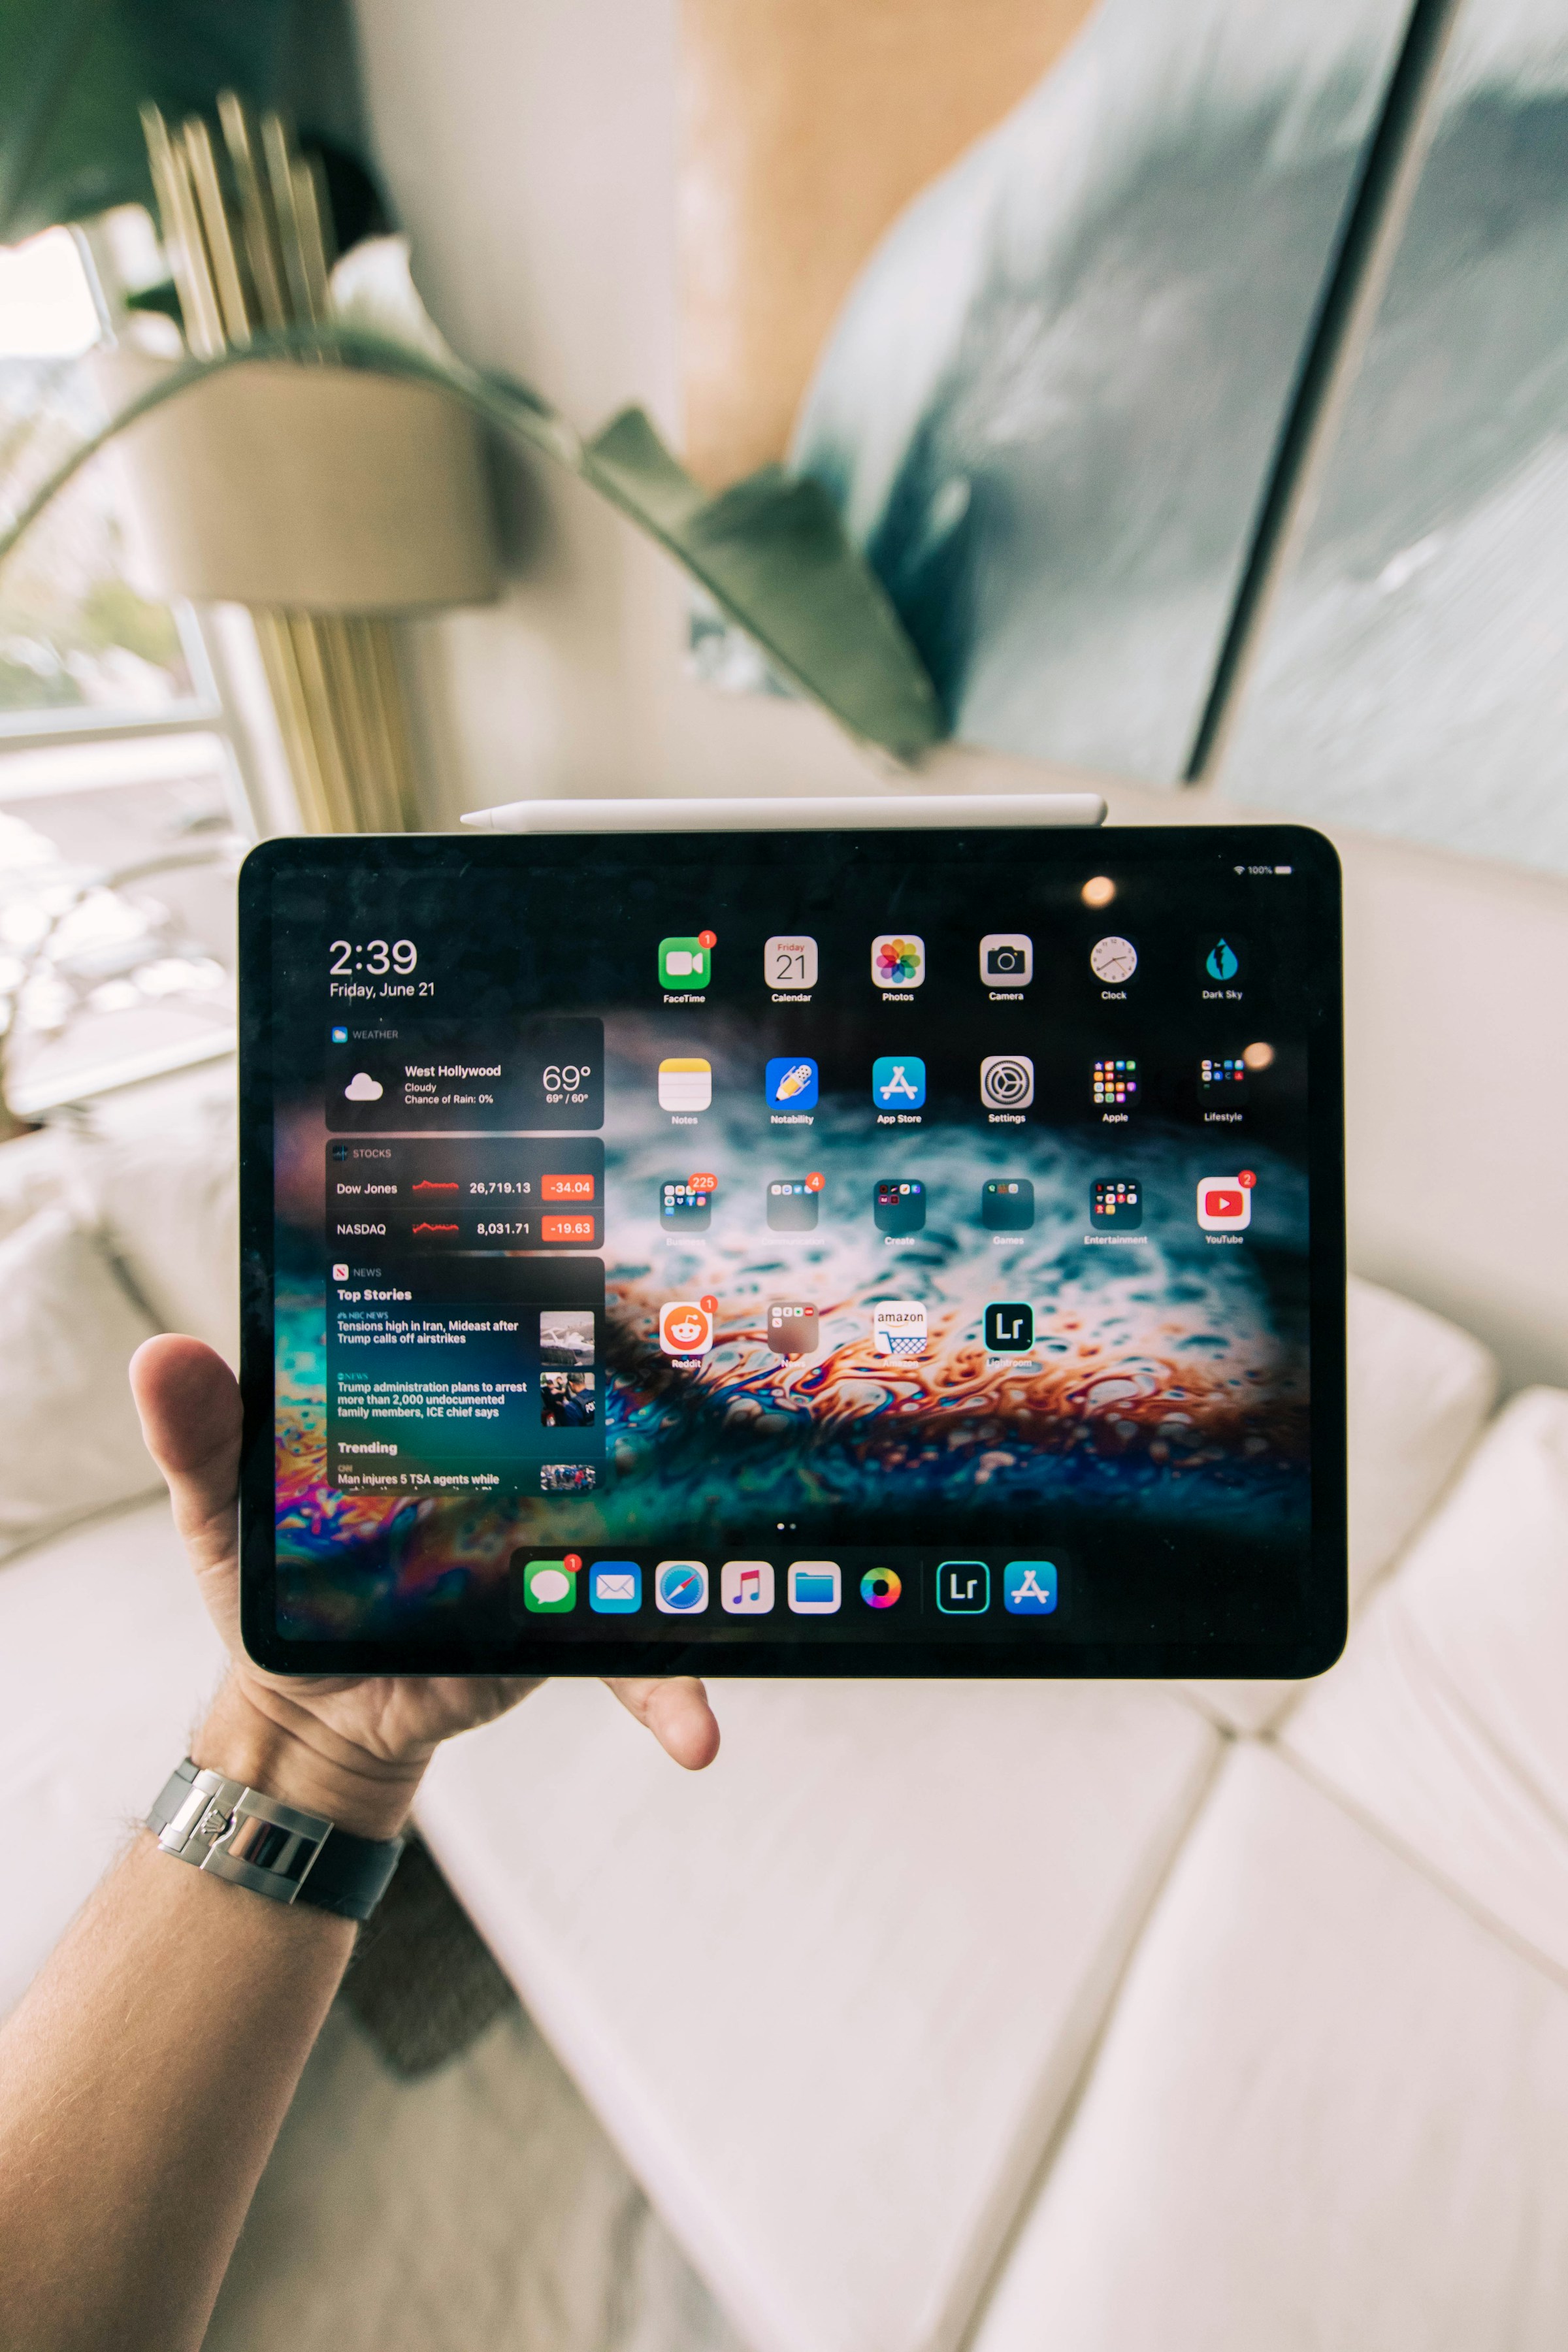 A person holding an iPad | Source: Unsplash